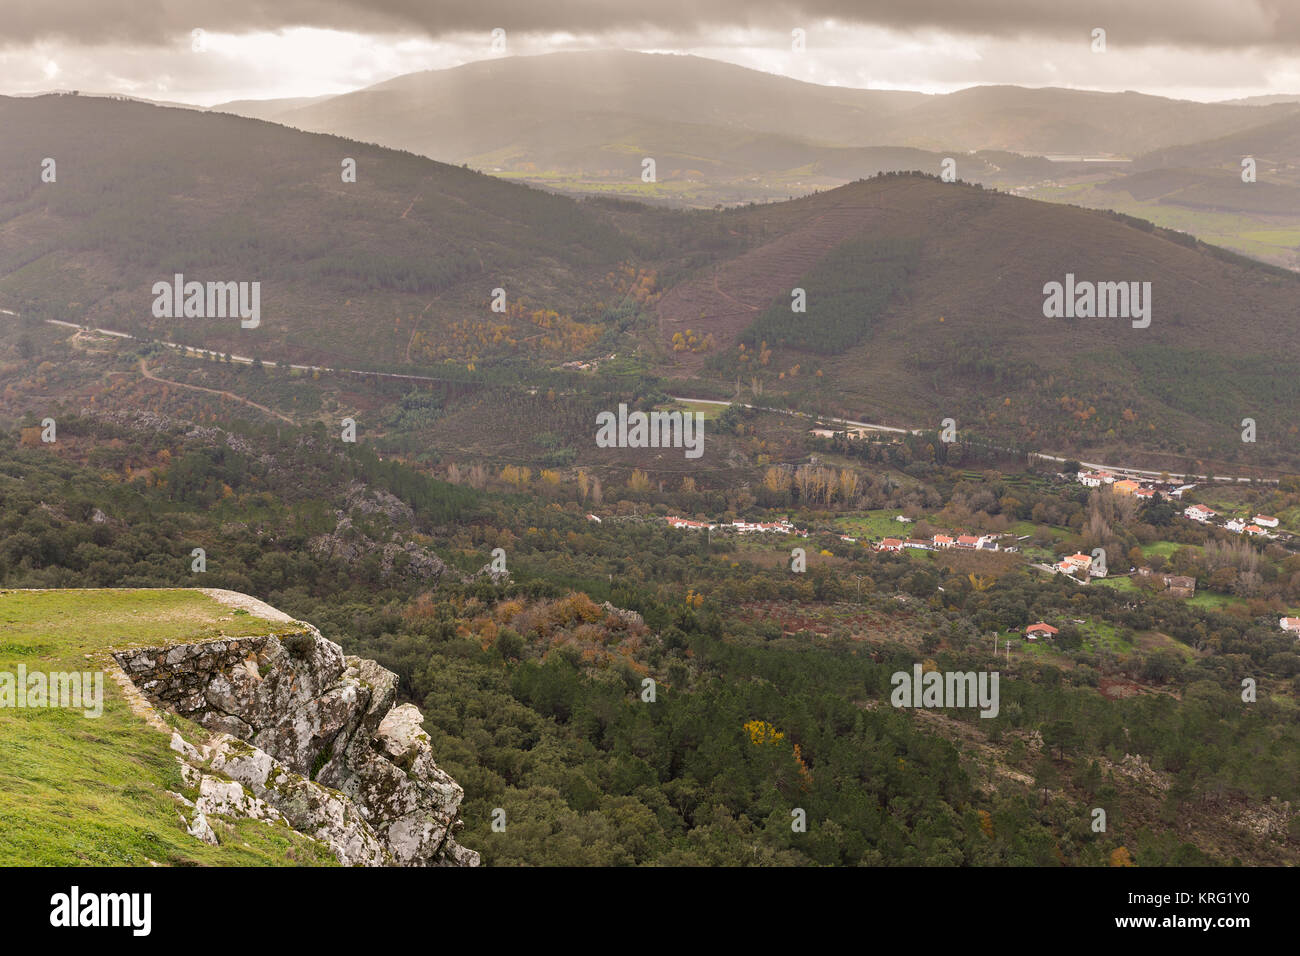 Landscape from Marvao, Portugal. Stock Photo